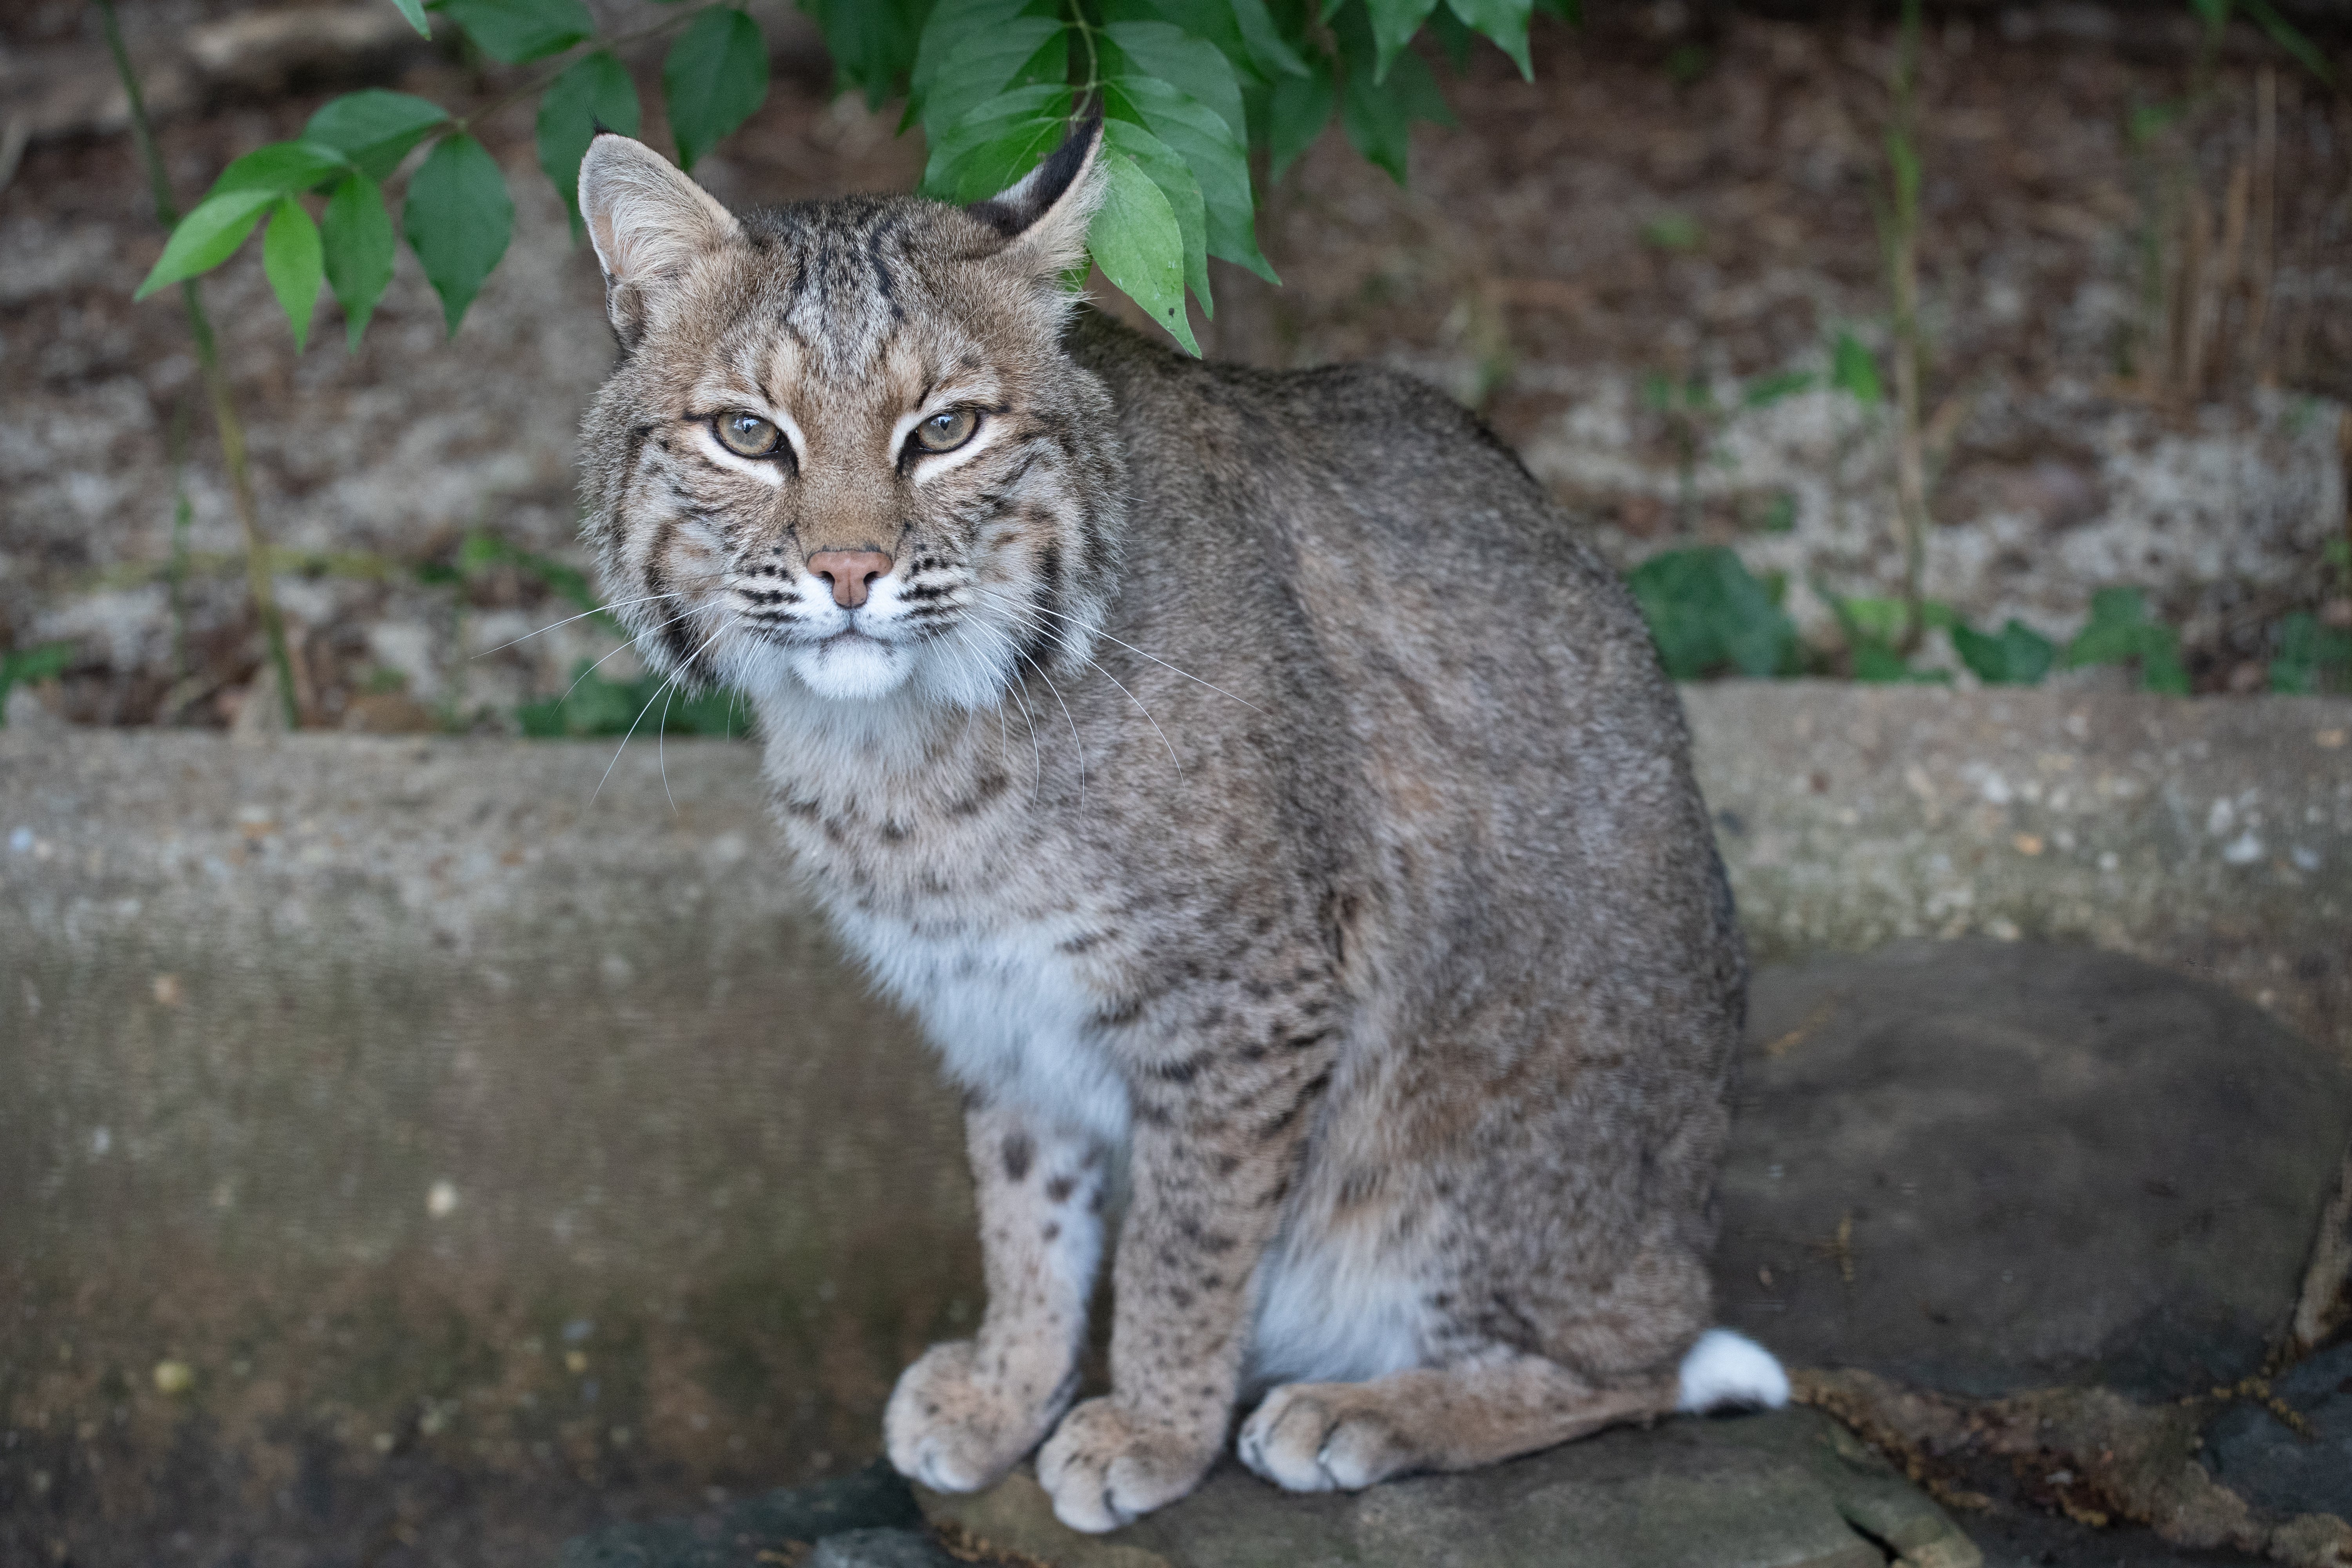 A bobcat sits on a rock in its yard. There are leaves and a short stone wall behind it.